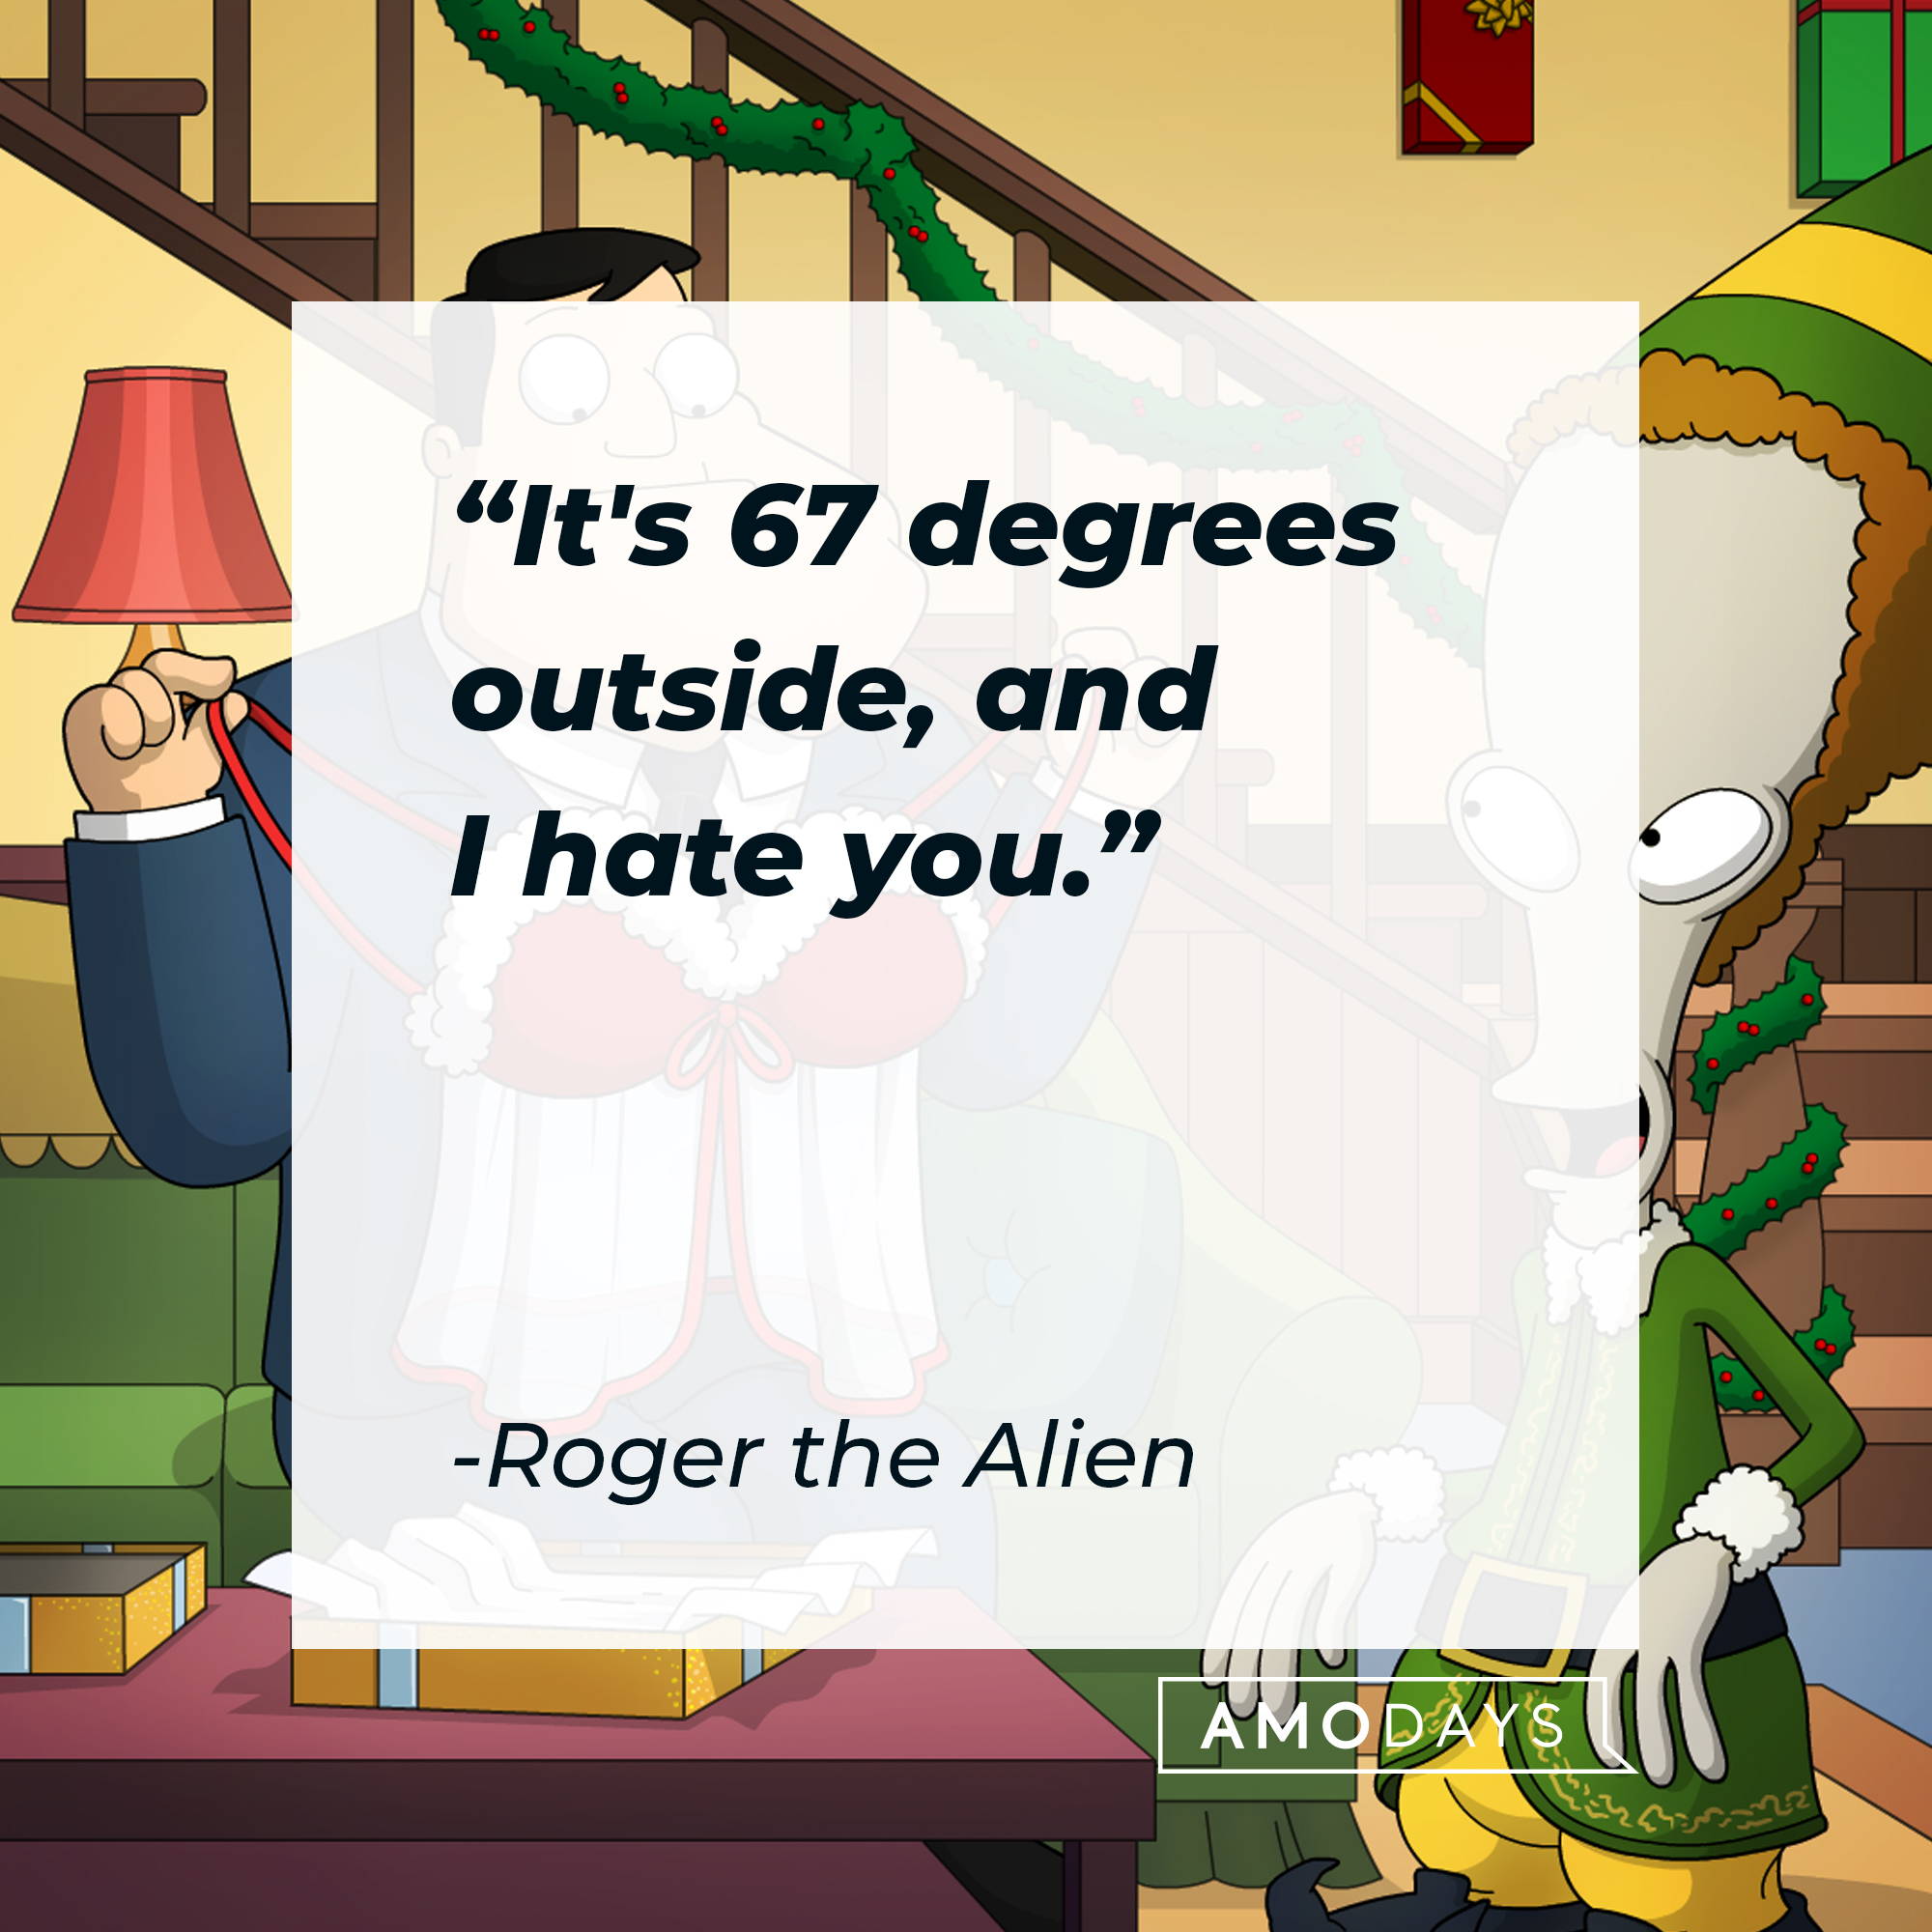 Roger the Alien's quote: "It's 67 degrees outside, and I hate you." | Source: AmoDays